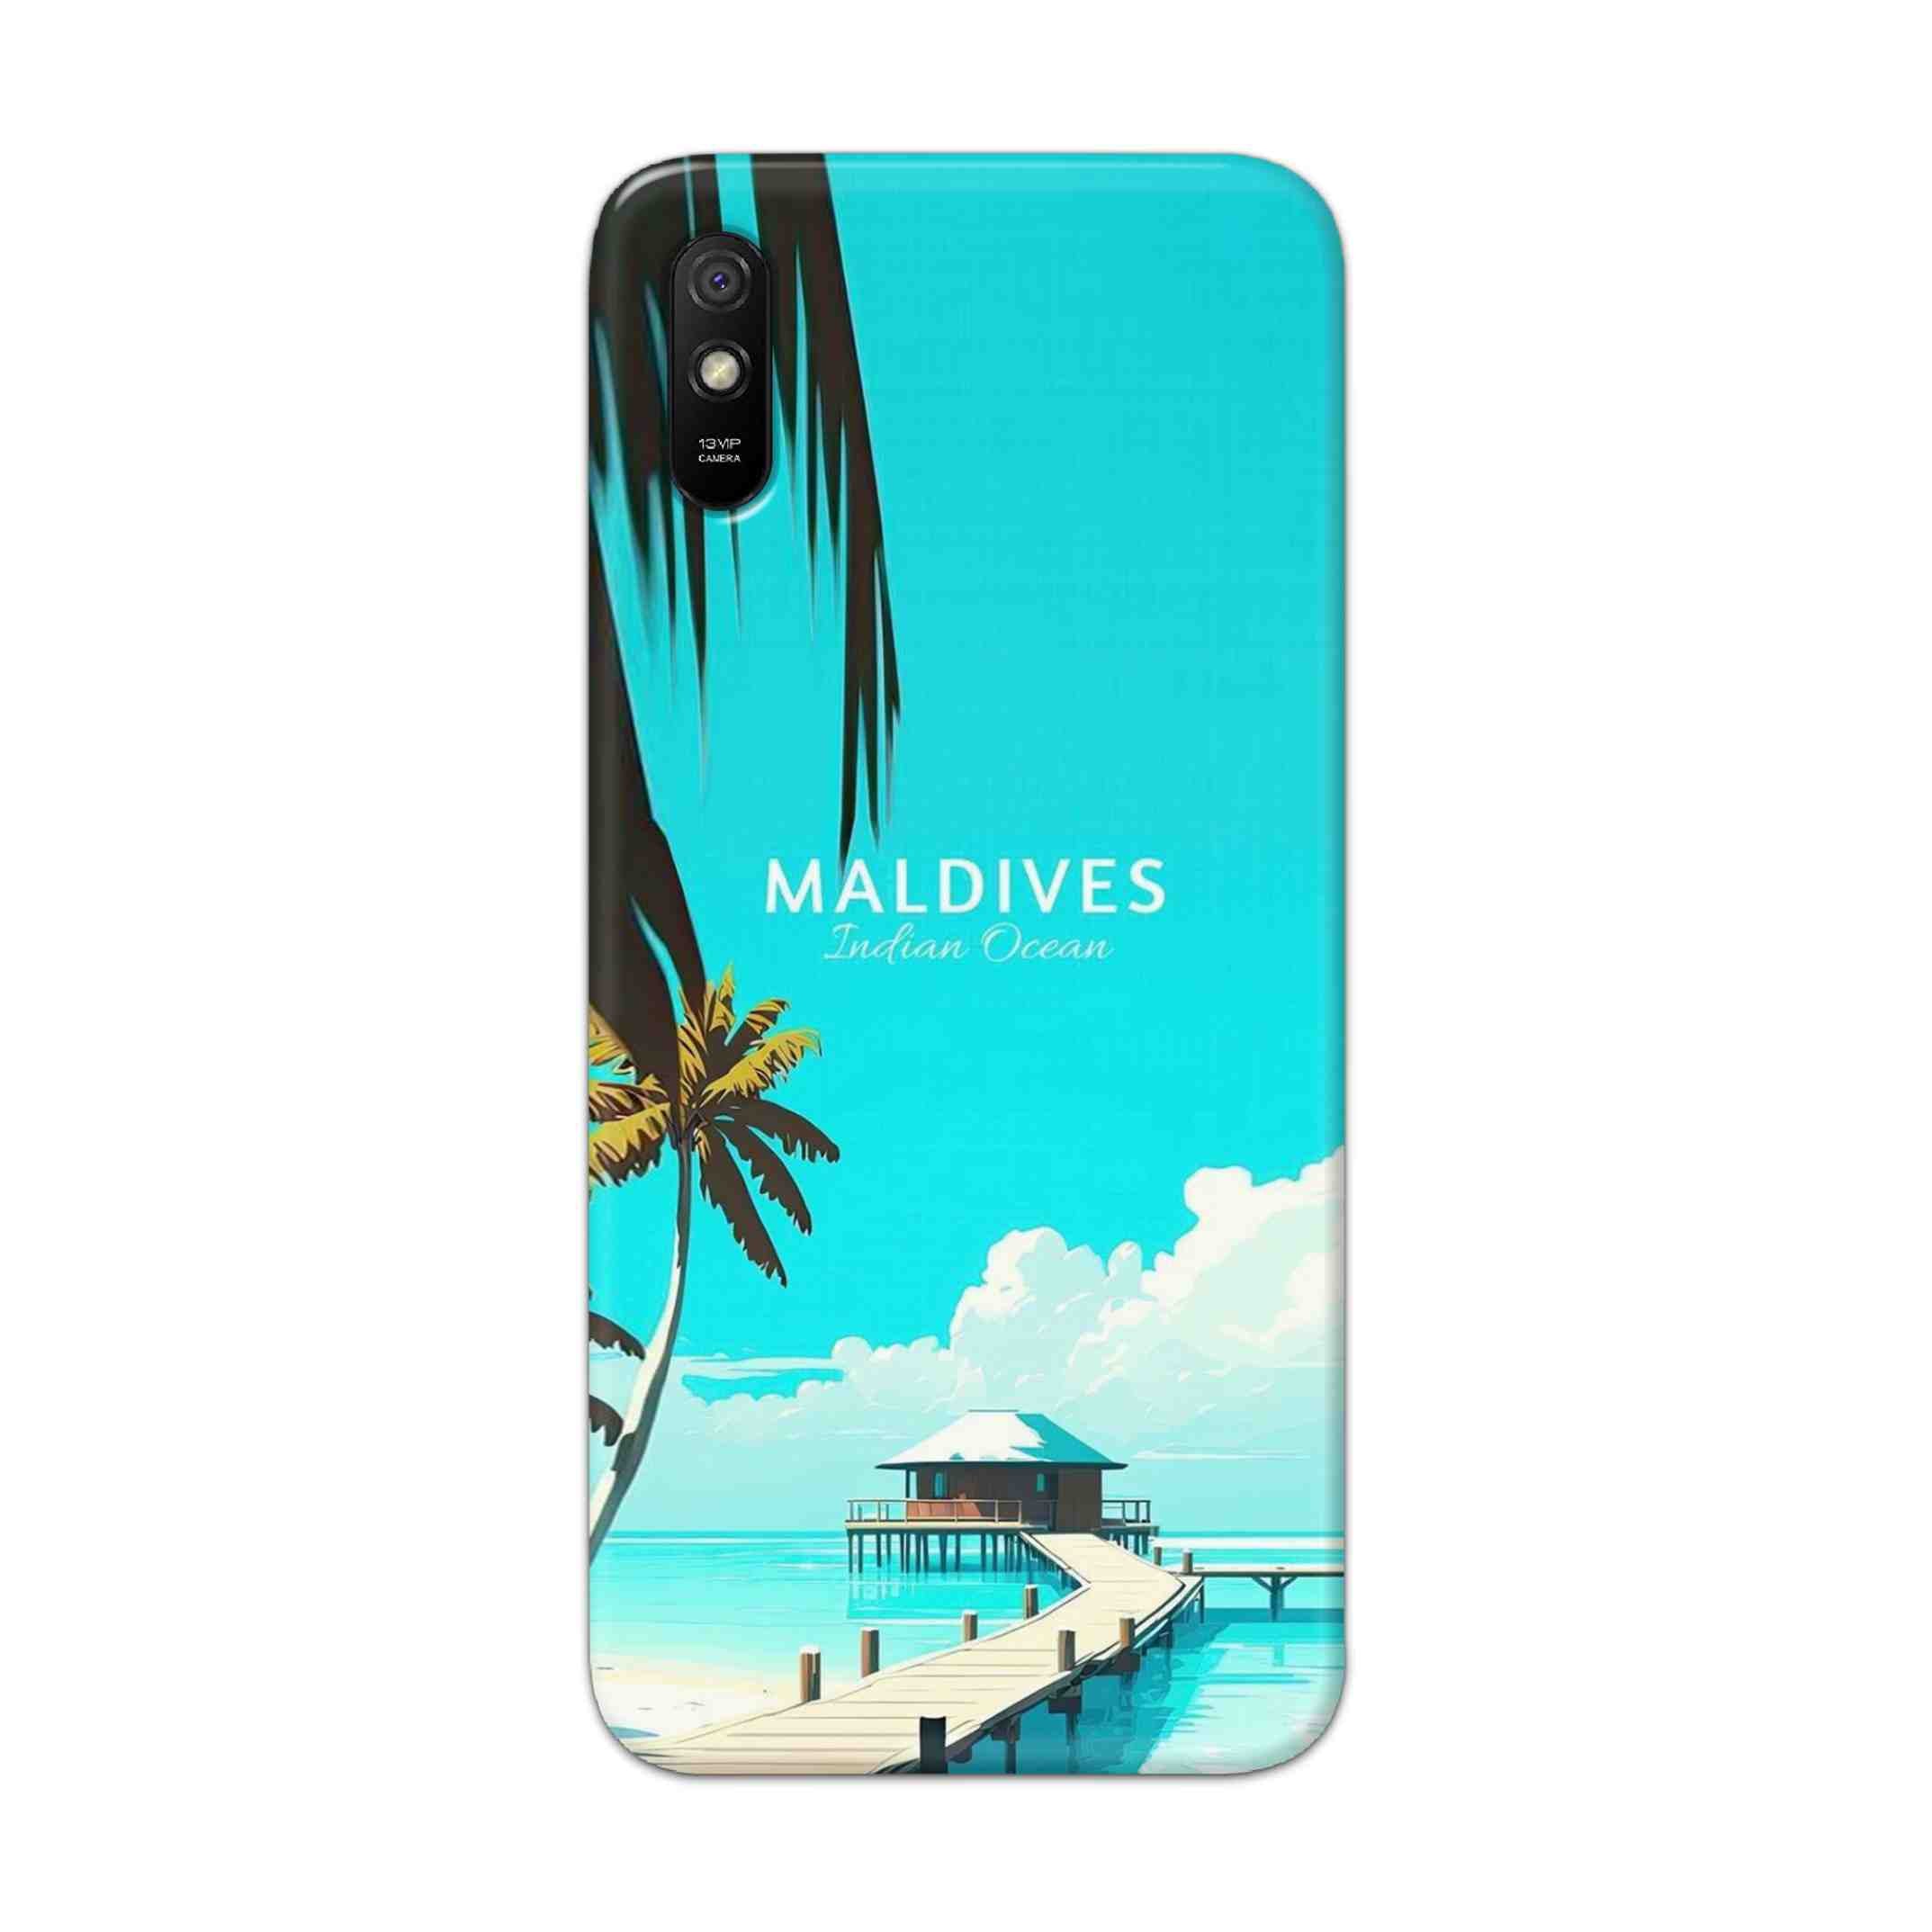 Buy Maldives Hard Back Mobile Phone Case Cover For Redmi 9A Online